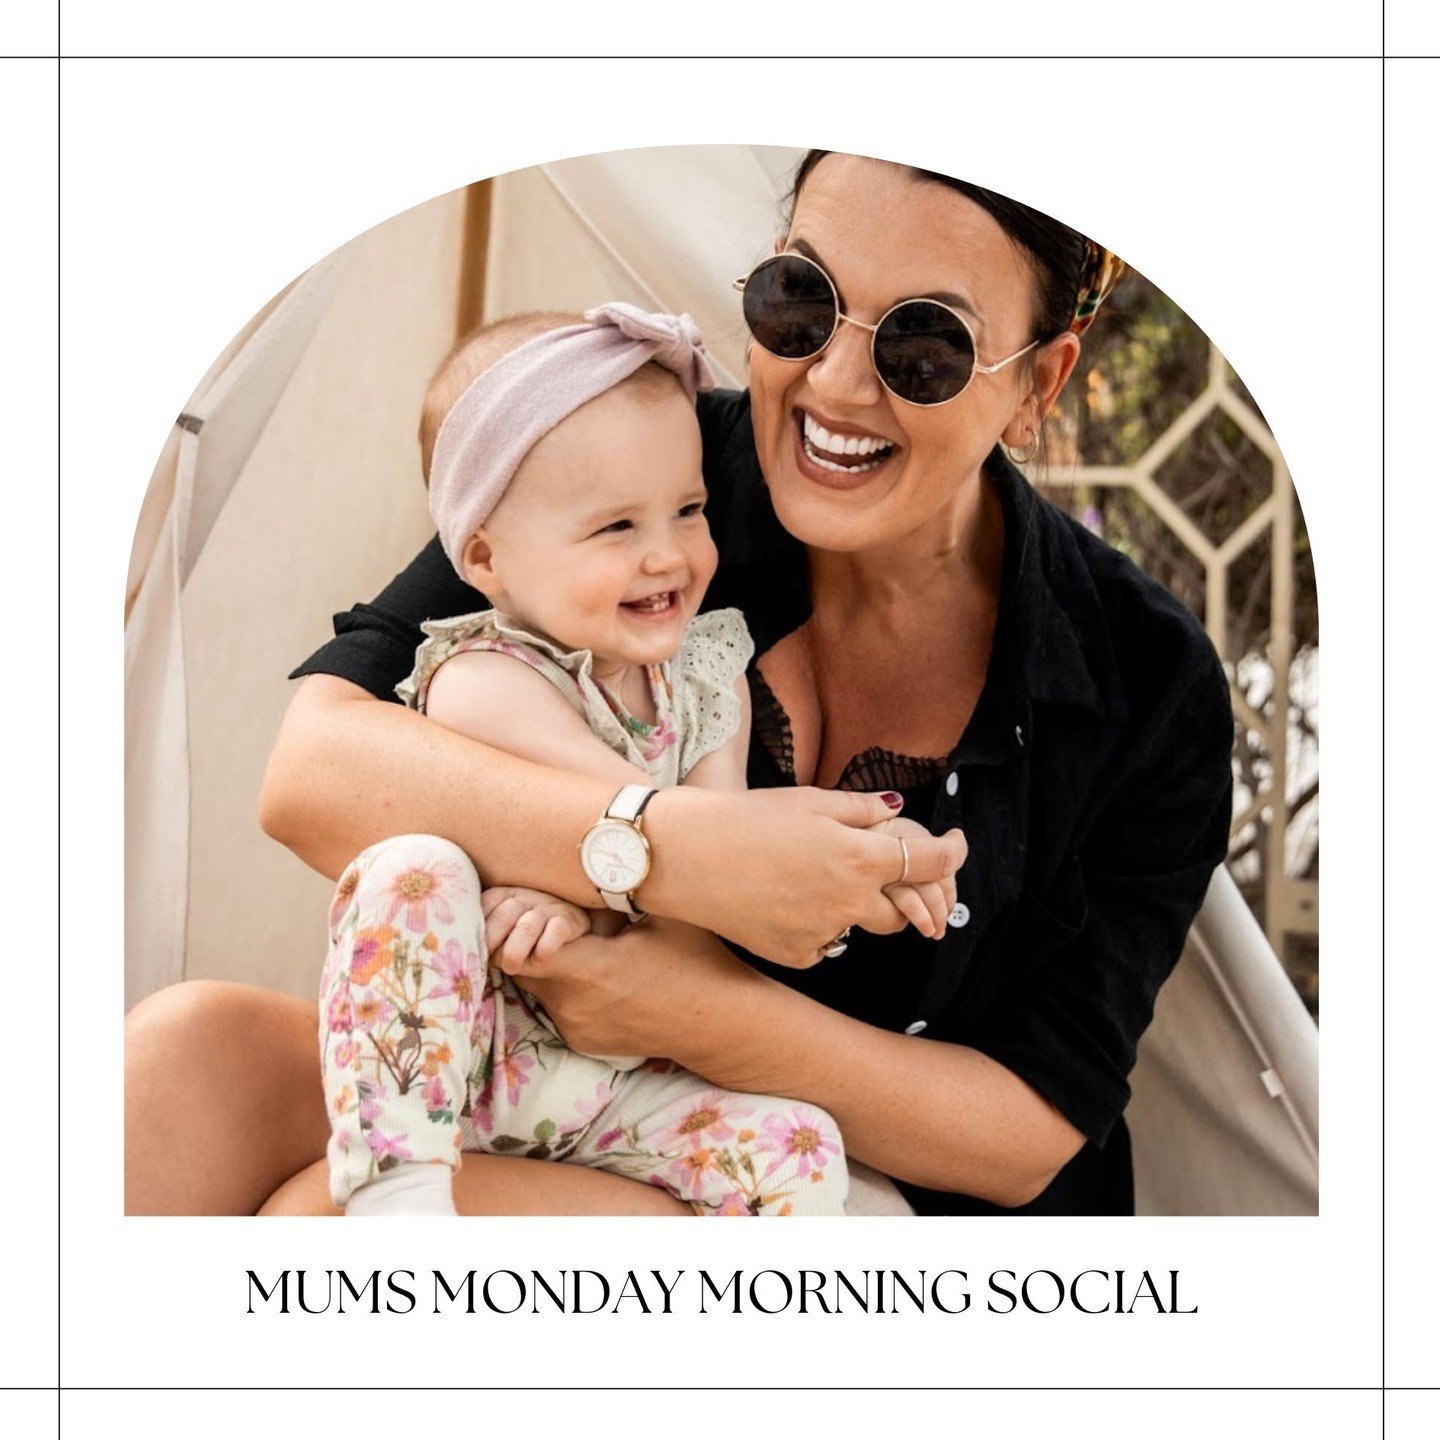 ✨Mums Monday Morning Social✨ 

Every Monday 9am - 1:30pm.

Where? Sanderson&rsquo;s, Al Seef, Abu Dhabi.

Registration? Life is unpredictable, just come if you can, when you can!

--
#postpartum #postpartumsupport #mumsinabudhabi #womenscommunity #wo